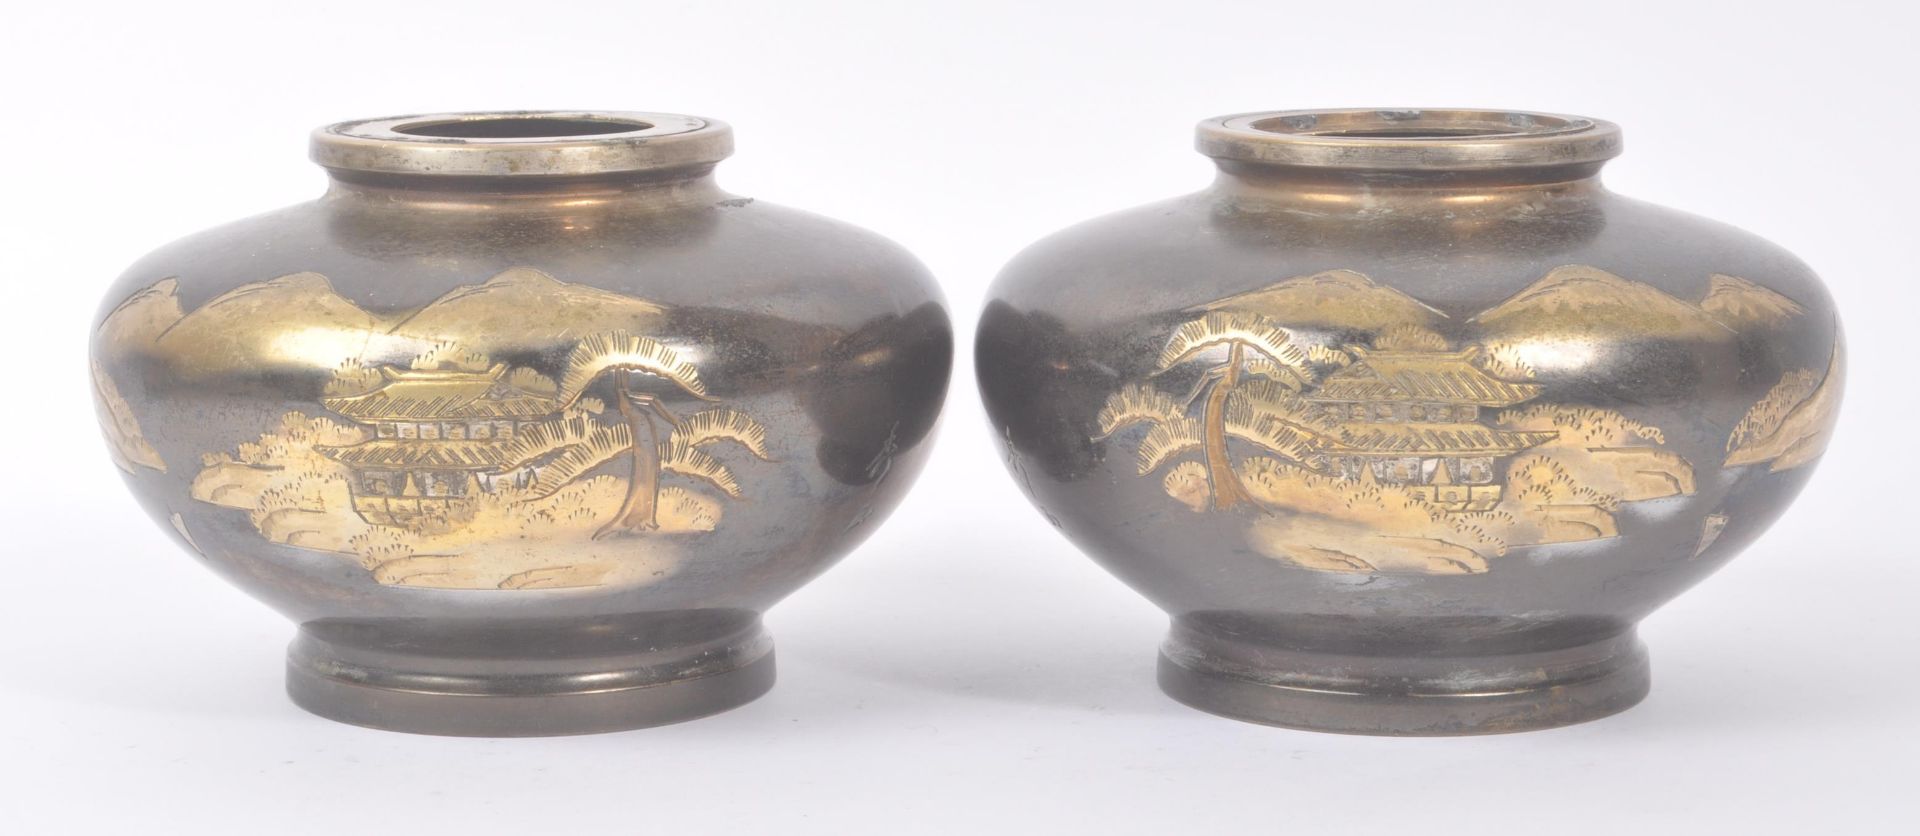 PAIR OF EARLY 20TH CENTURY JAPANESE BRASS VASES - Image 6 of 7